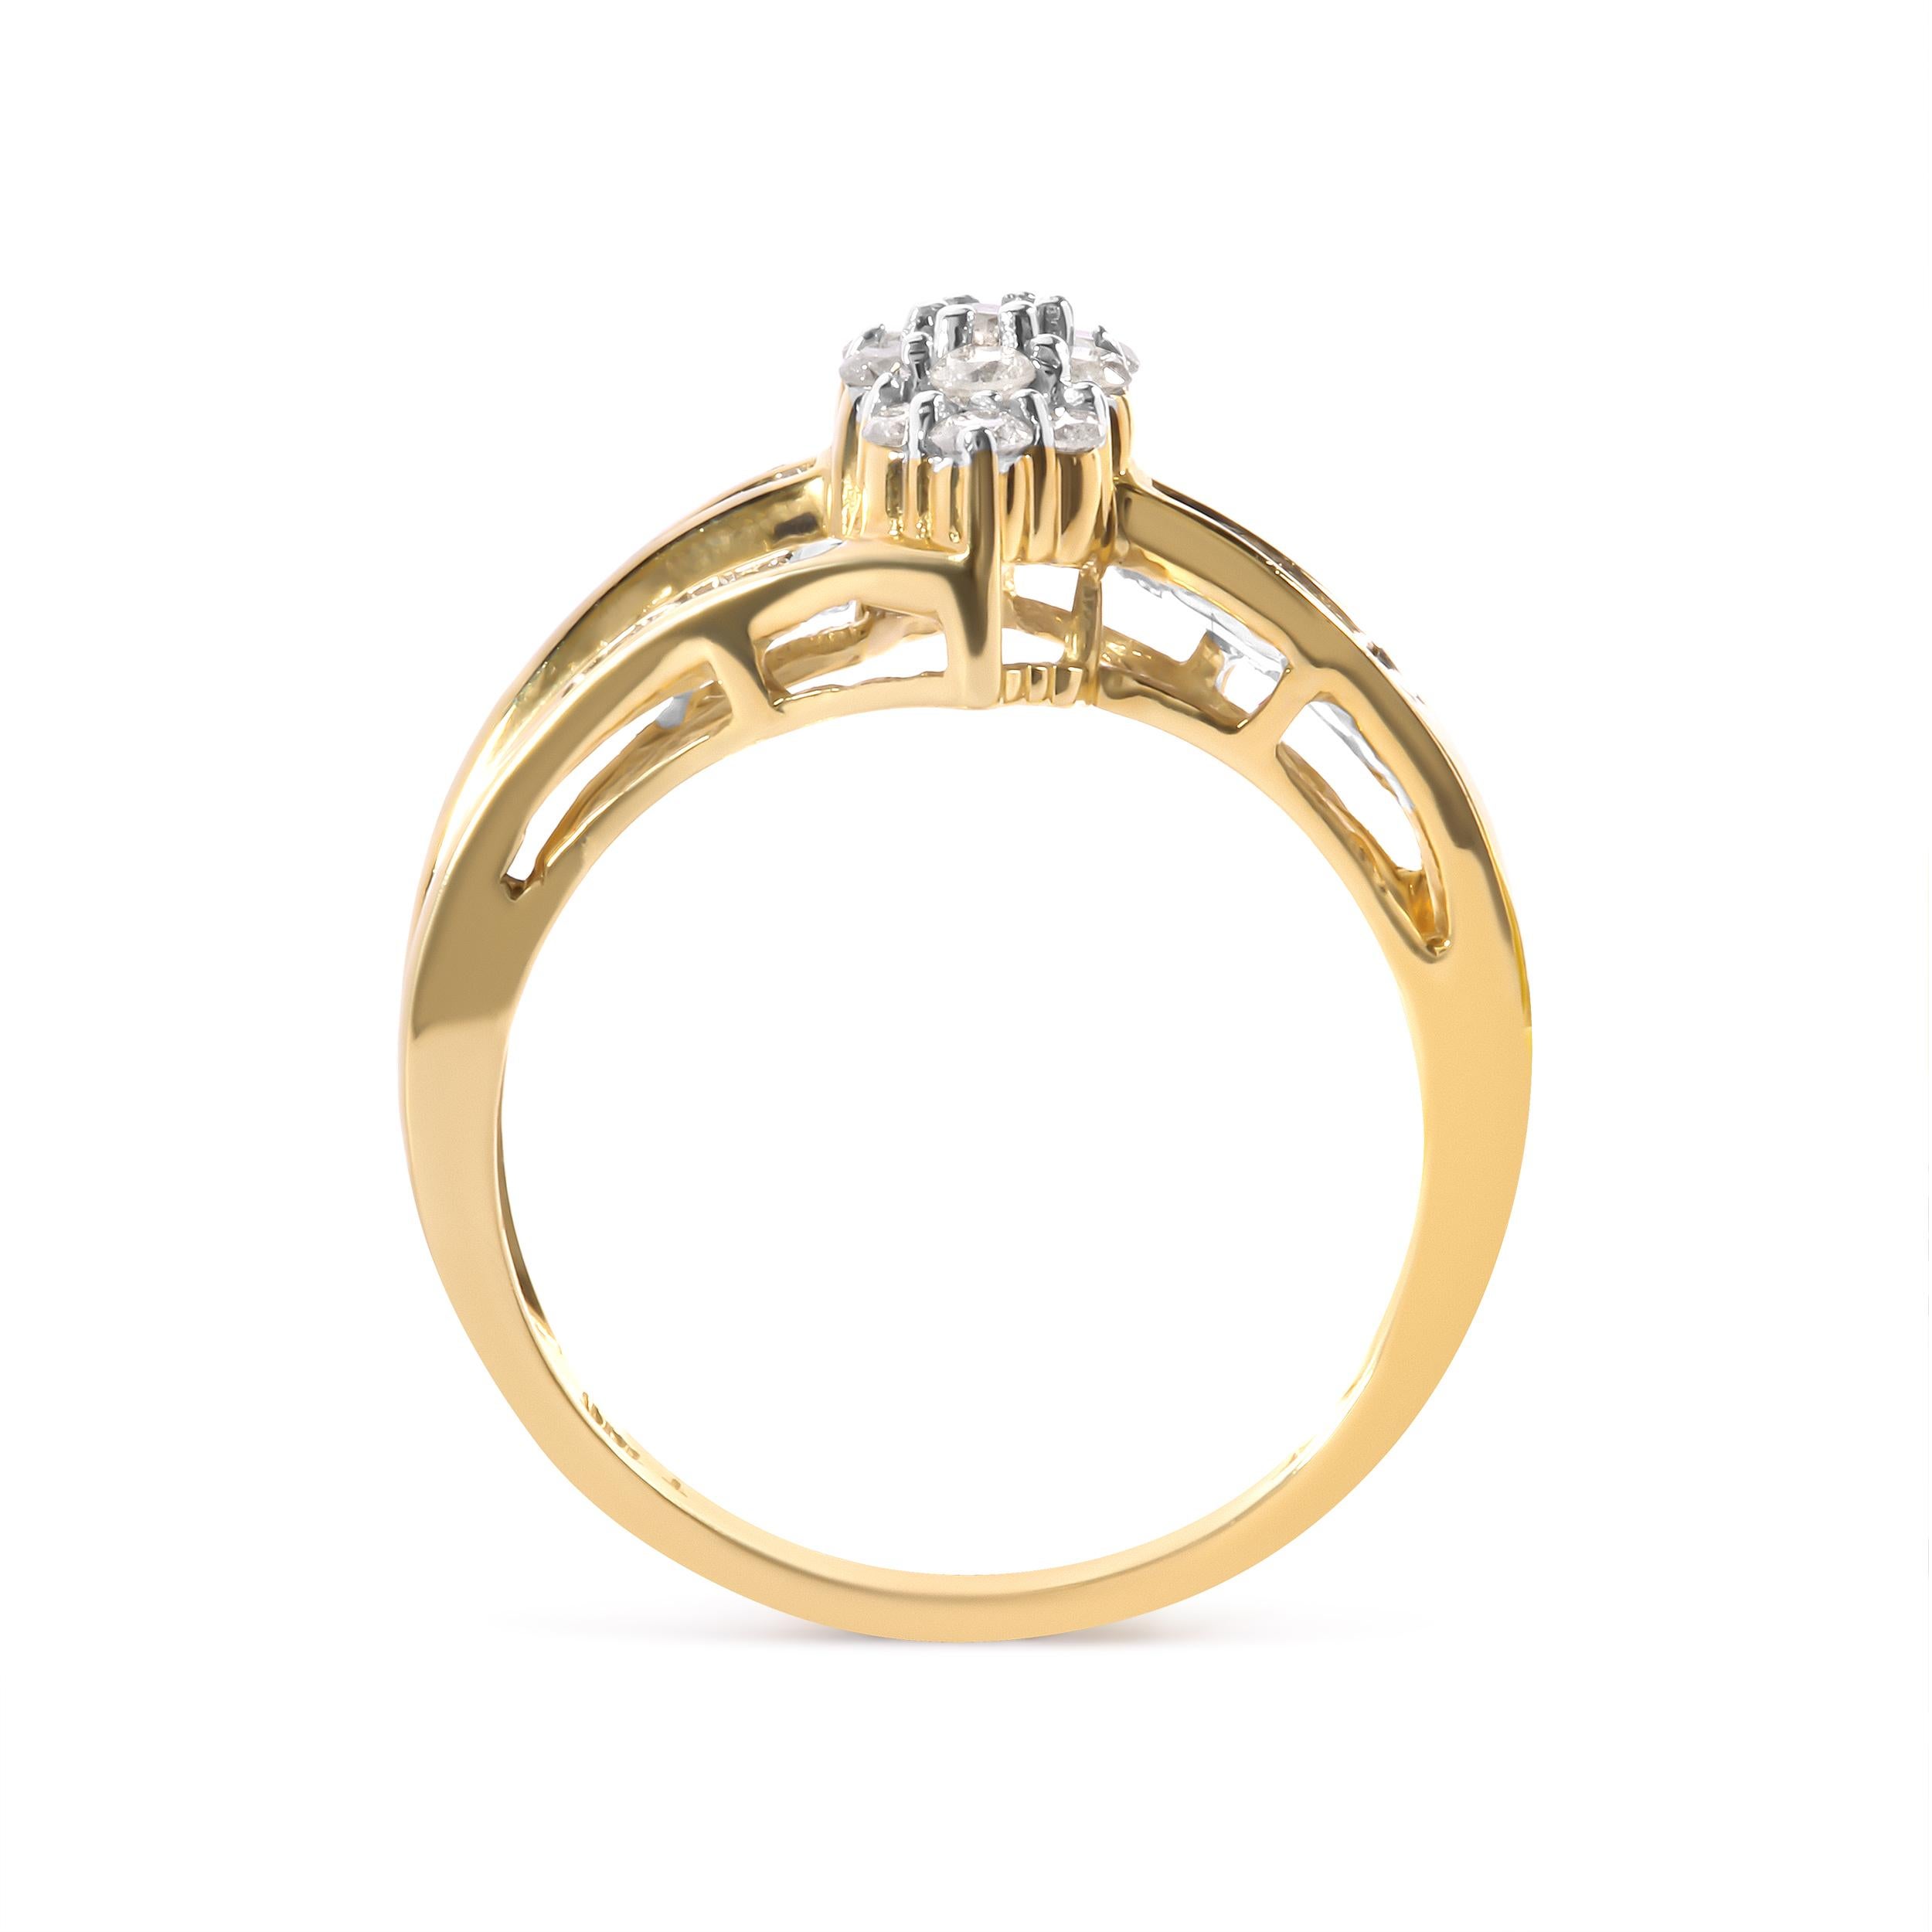 Indulge in the exquisite allure of this fashion ring crafted in 10K yellow gold, a mesmerizing treasure that will captivate any woman's heart. Adorned with a dazzling display of natural diamonds, this enchanting piece boasts a total diamond weight